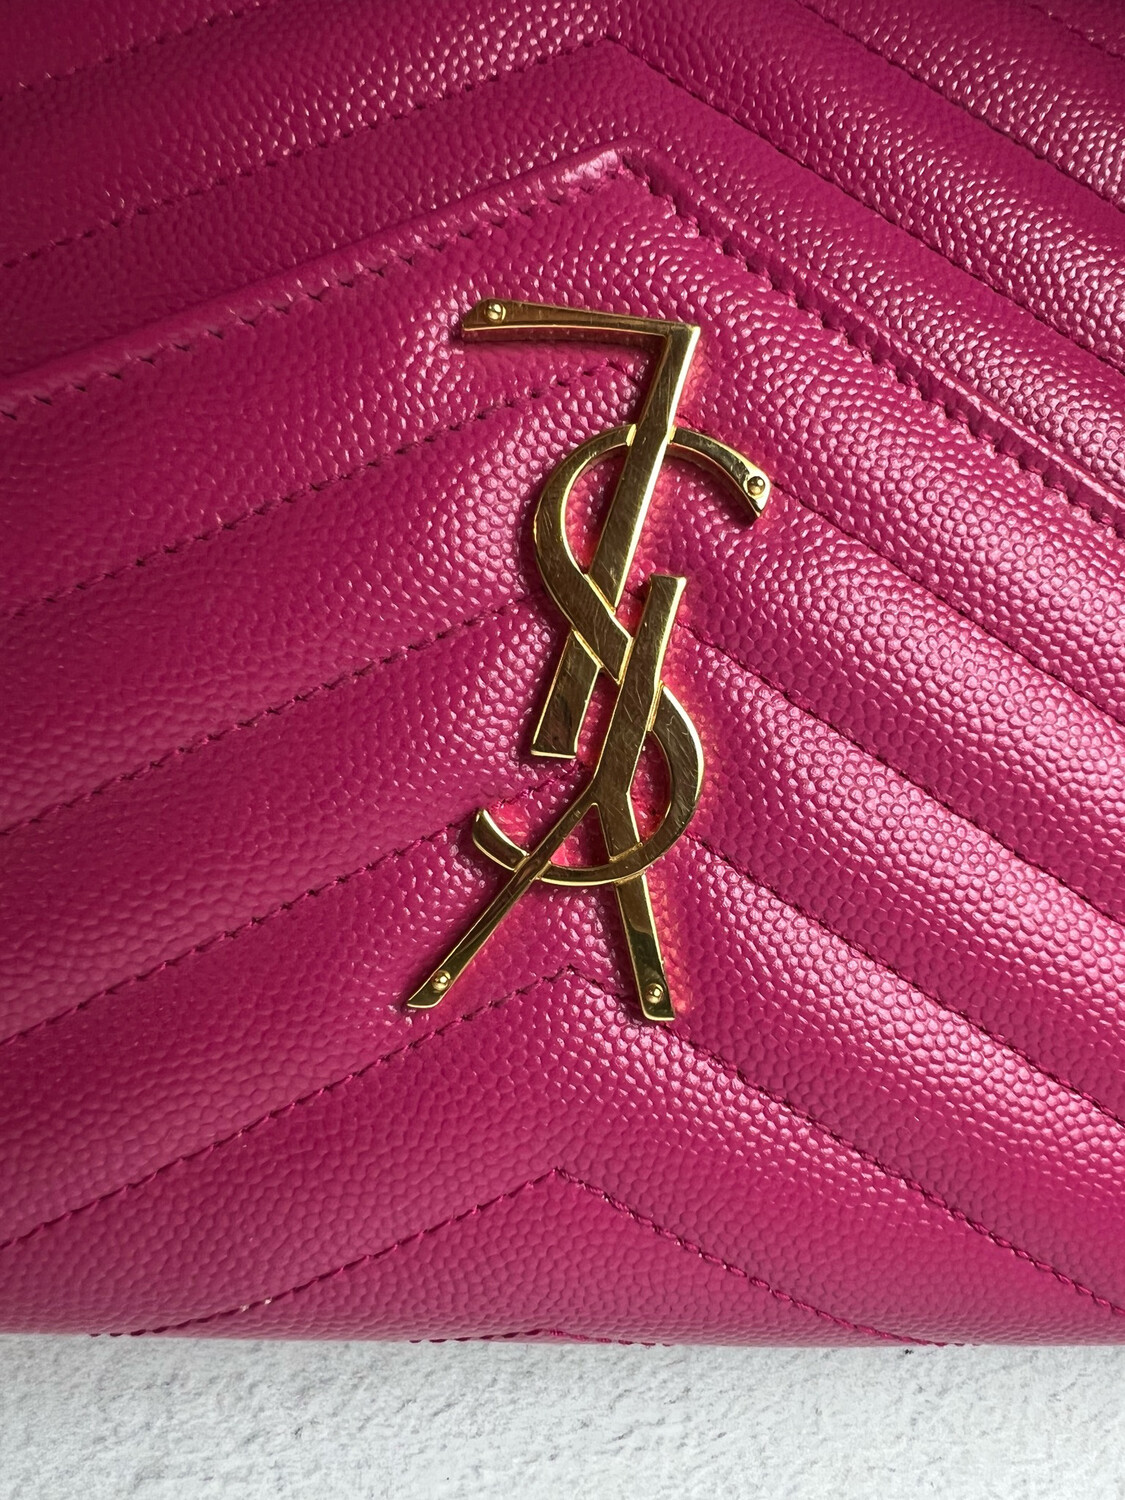 Saint Laurent Wallet on Chain Small, Pink Caviar with Gold Hardware,  Preowned in Box WA001